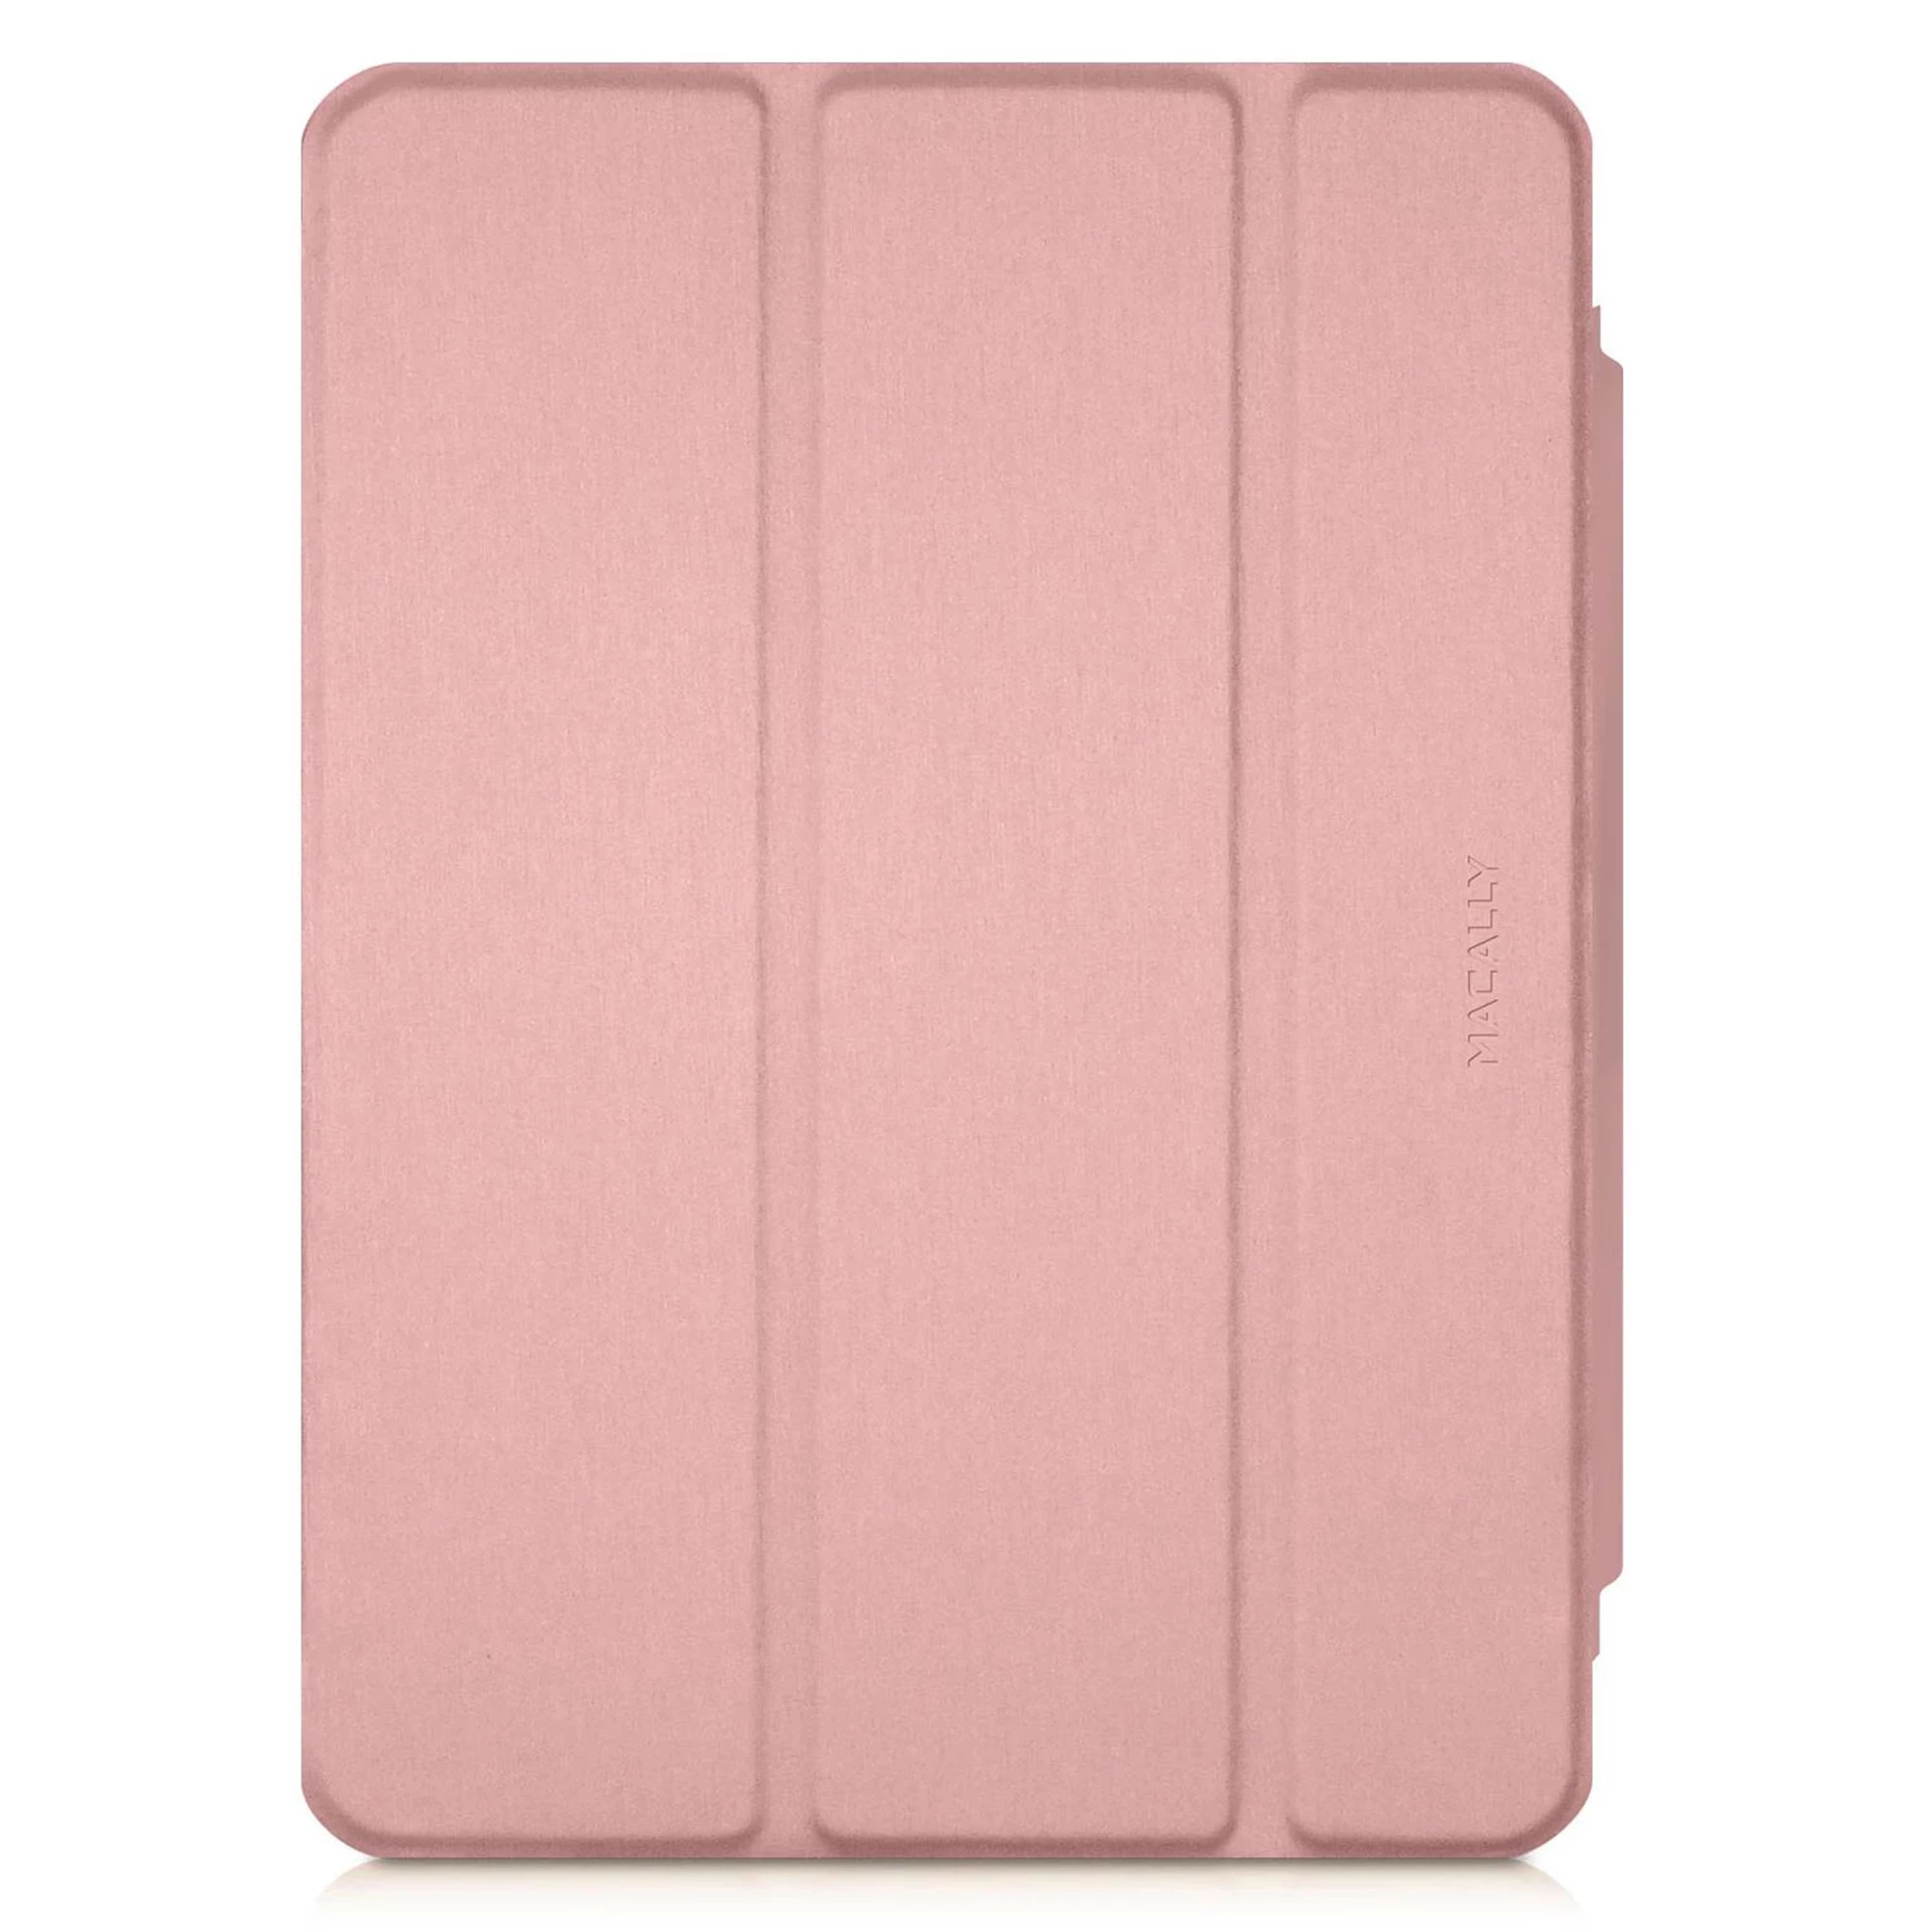 Macally Protective Case and Stand for iPad Air (4th generation) - Pink (BSTANDA4-RS)